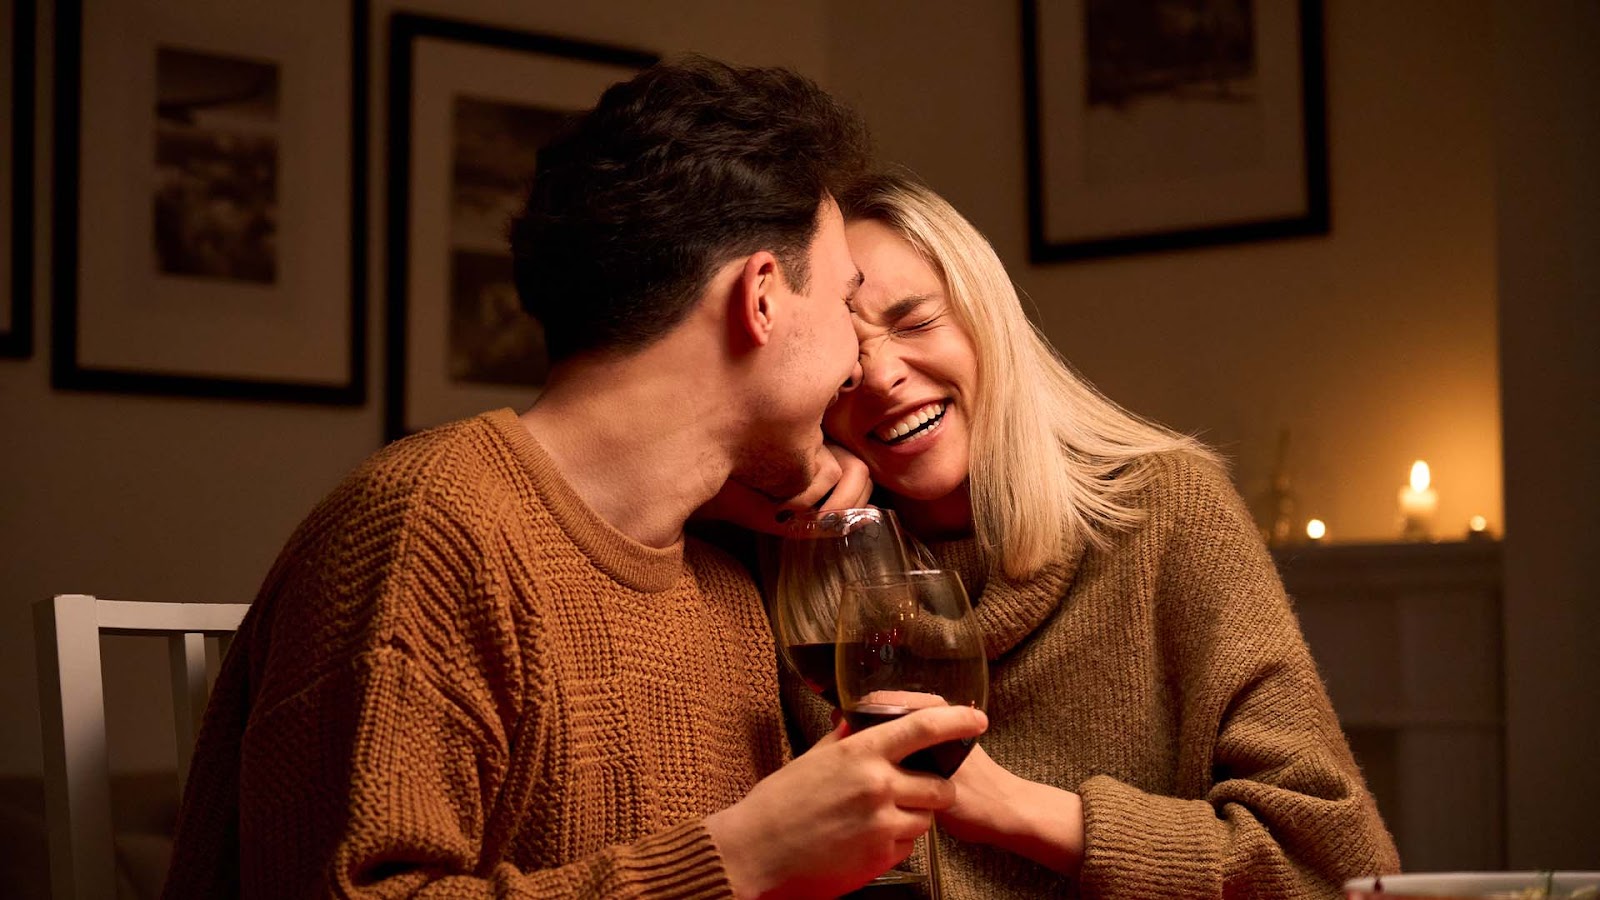 Brunette man and blonde woman in matching beige sweaters laughing while drinking wine